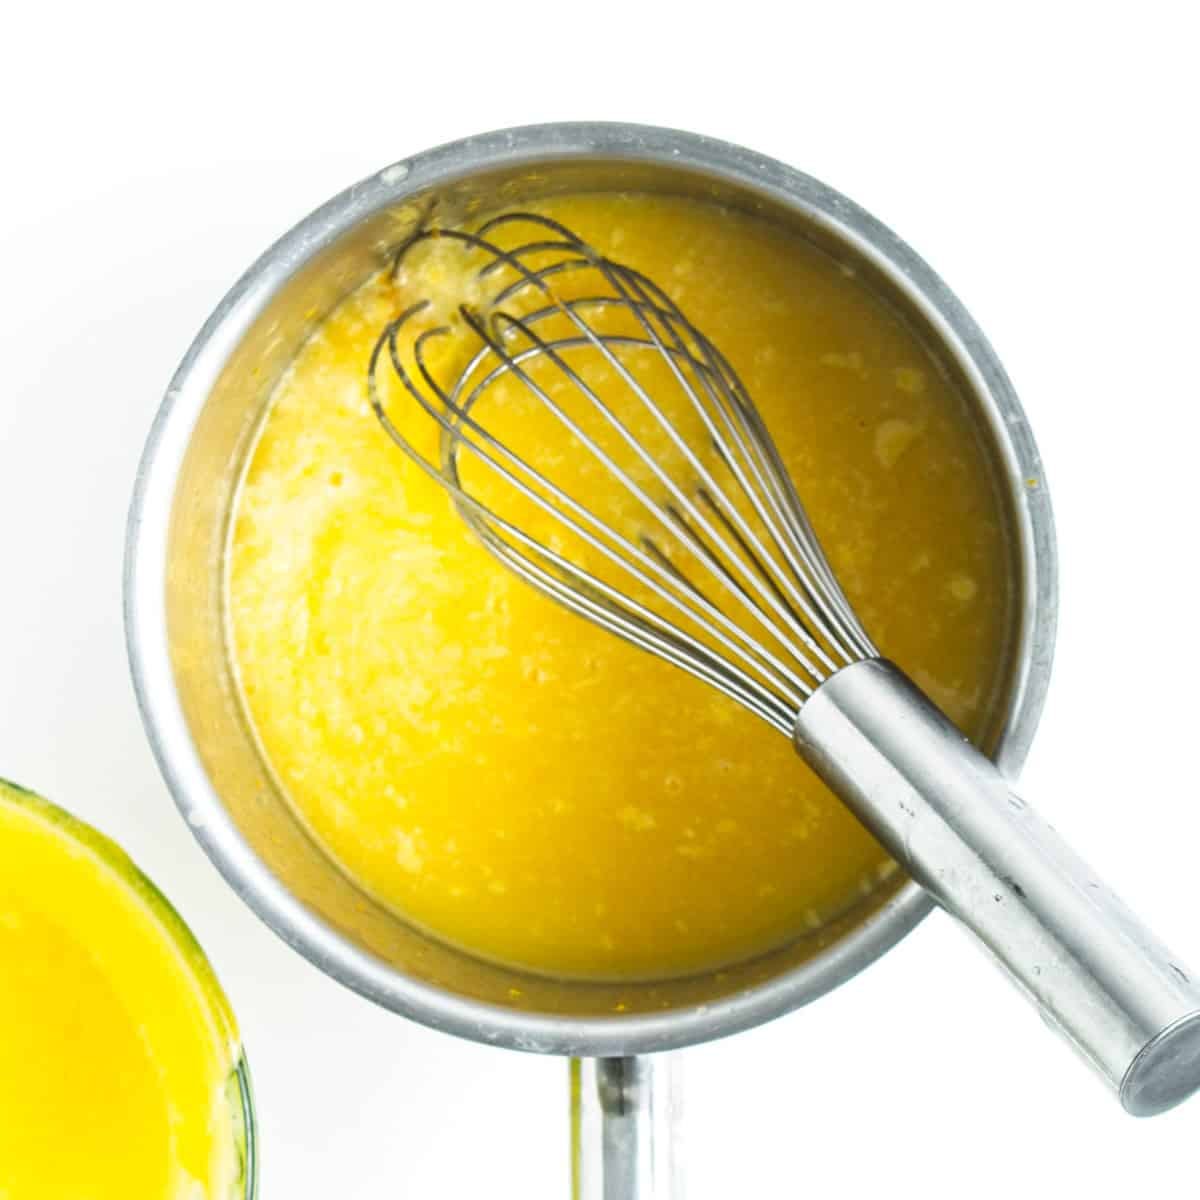 Saucepan with orange curd mixture and whisk.